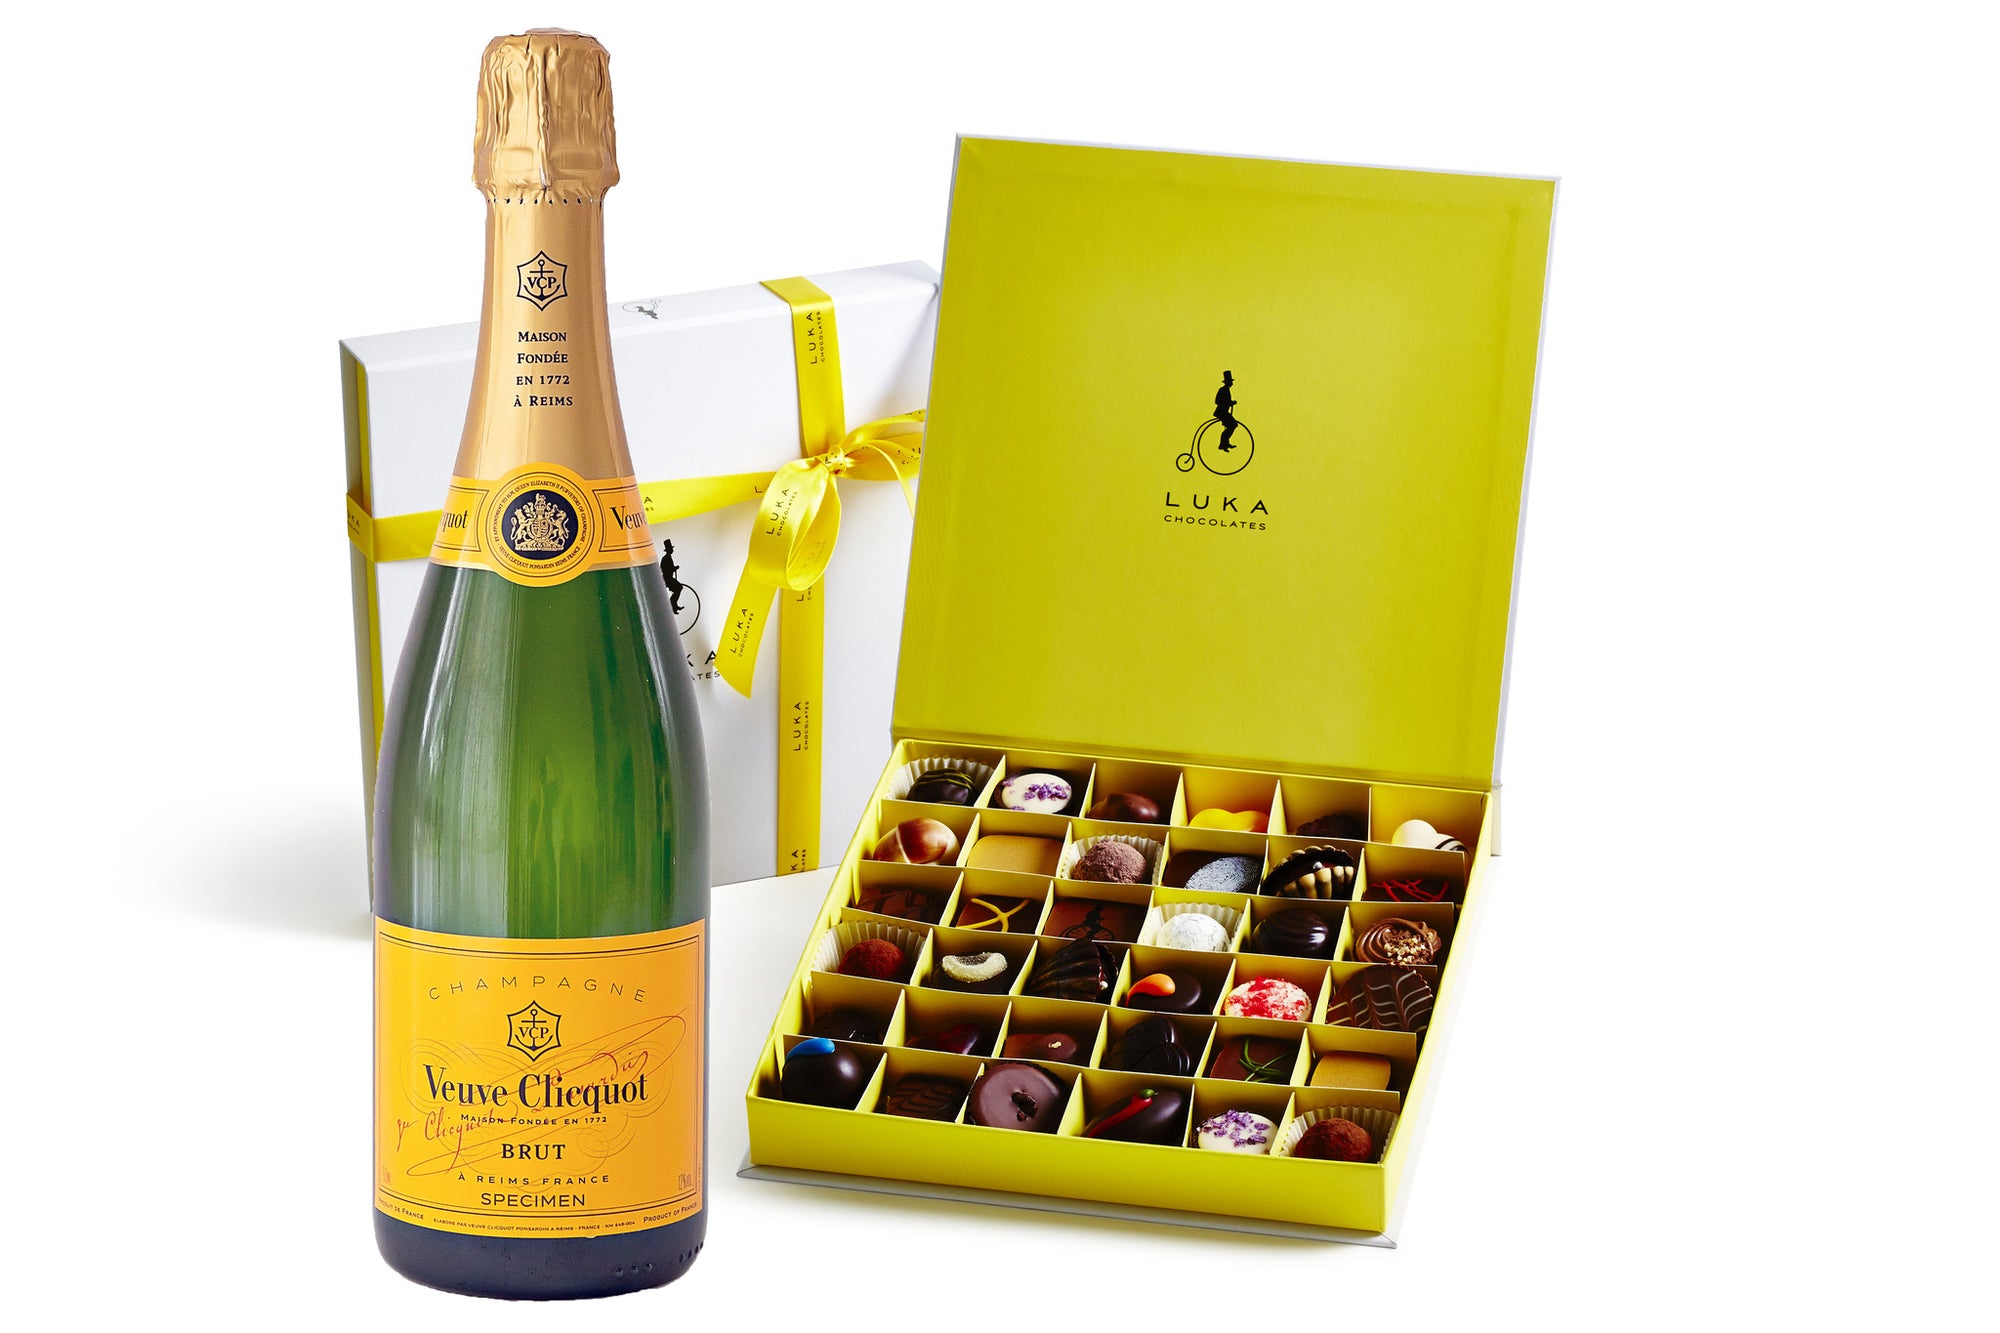 Veuve Cliquot Champagne and 36 hand made chocolates